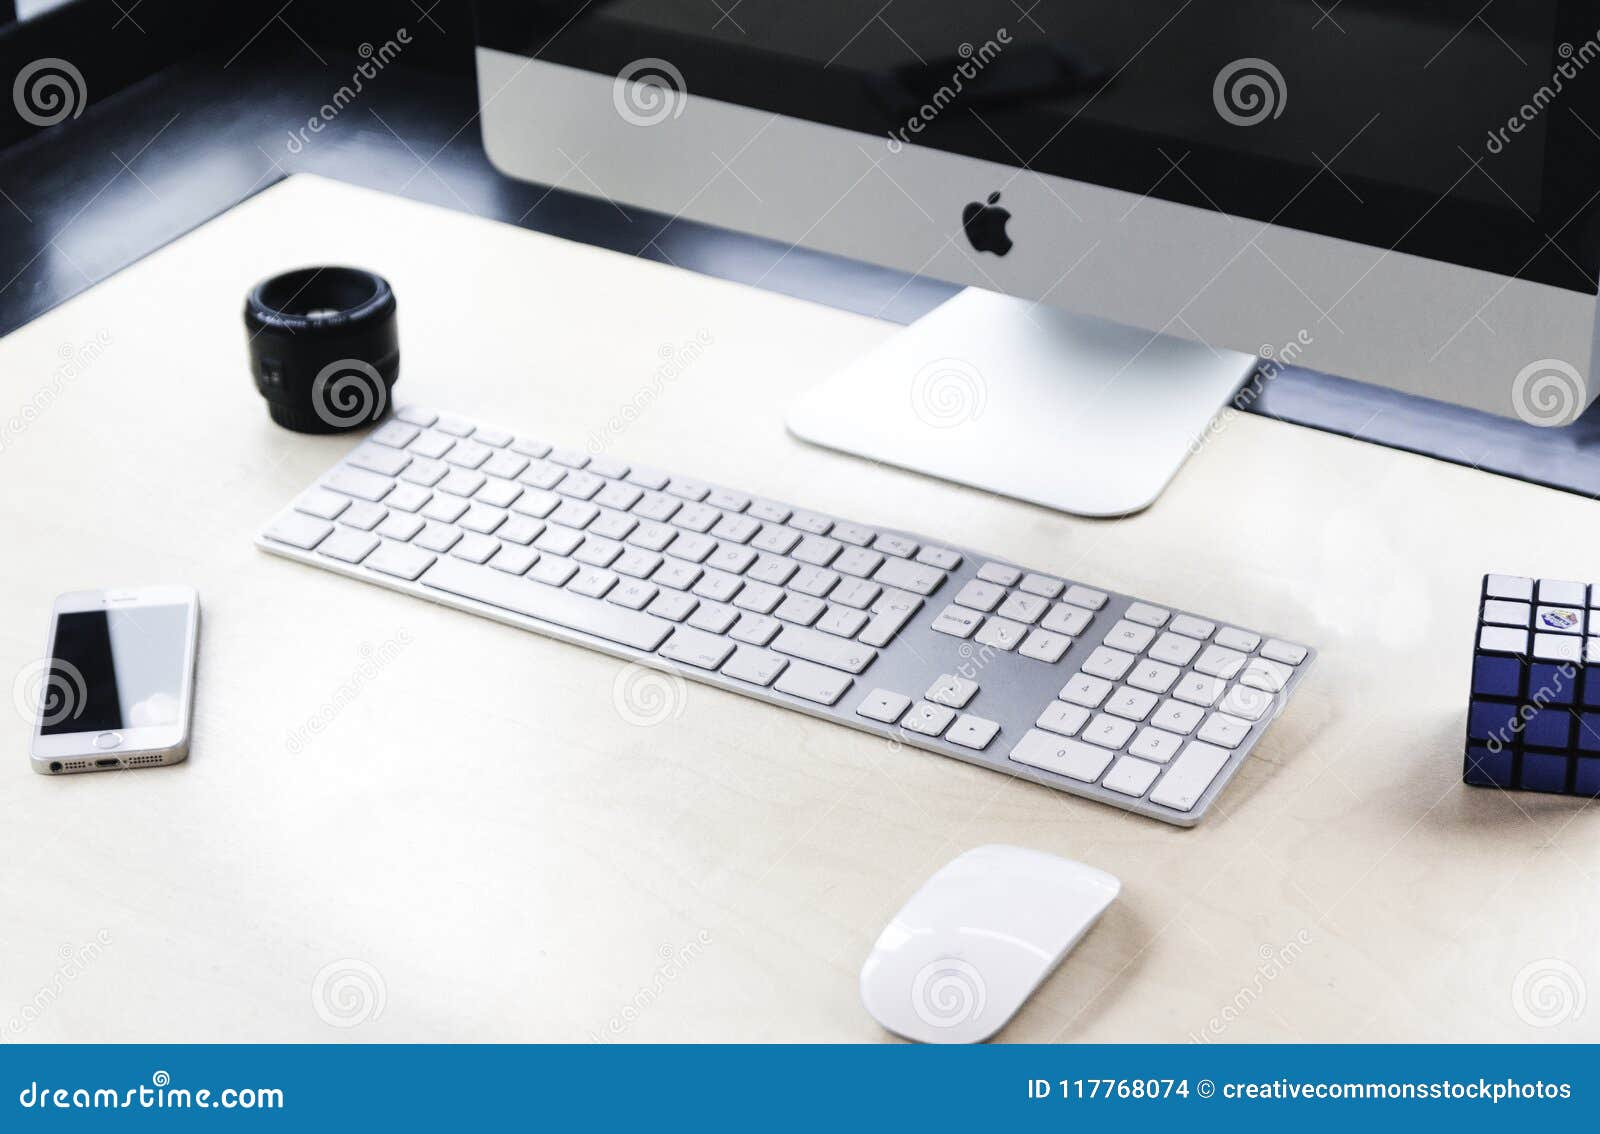 apple keyboard and mouse wireless